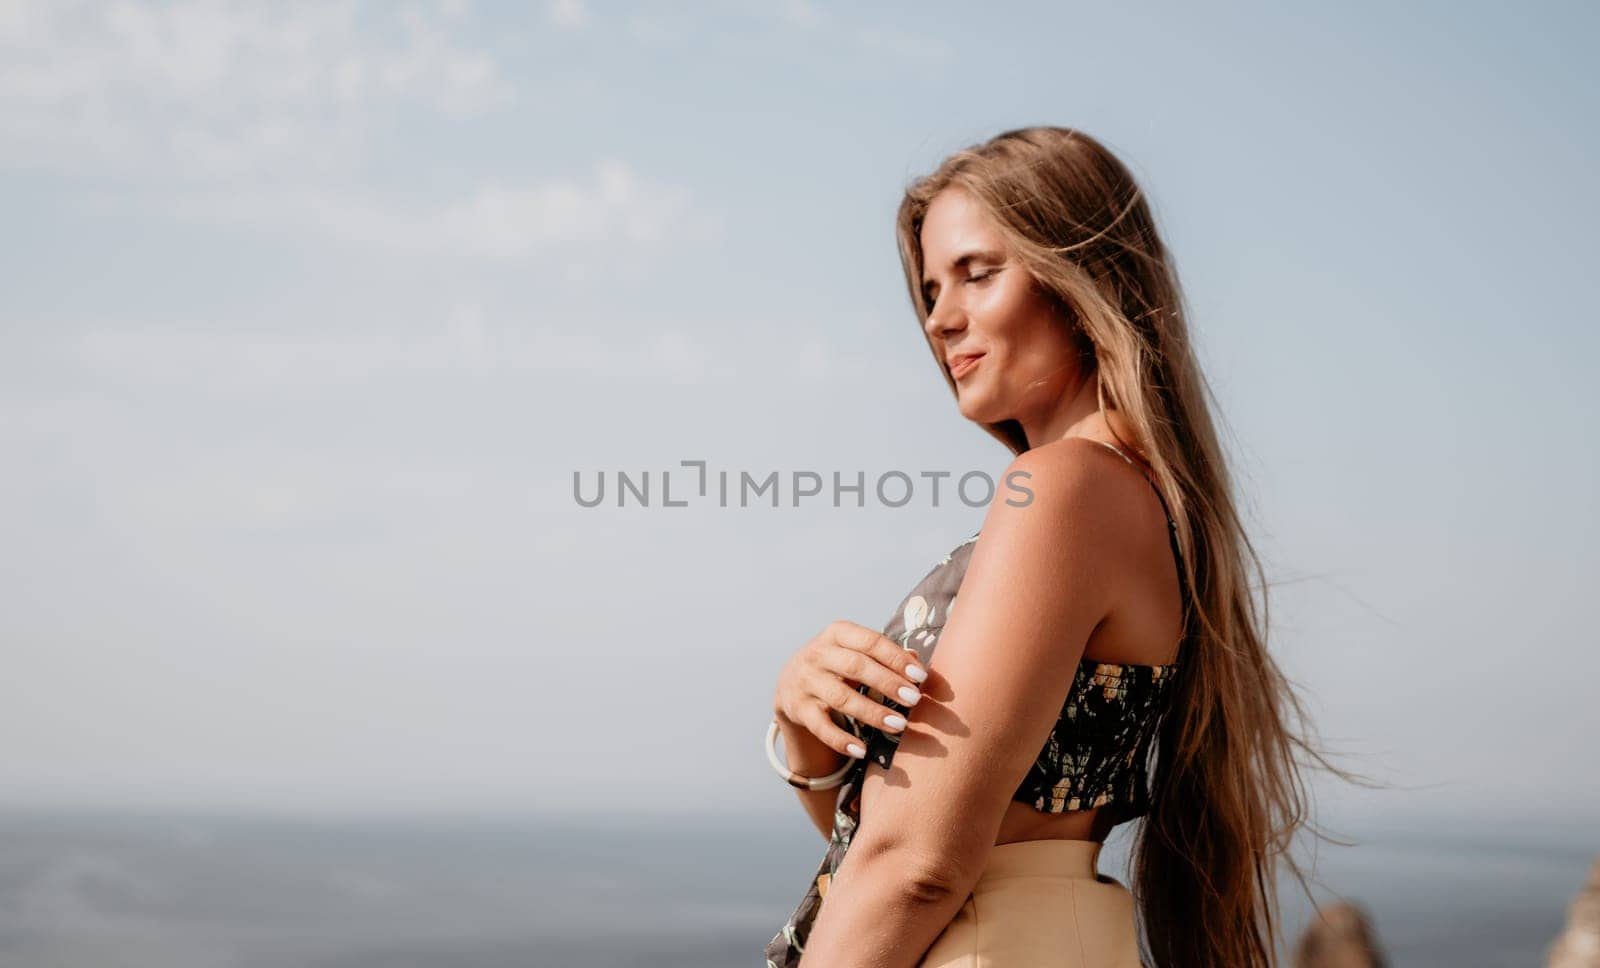 Woman travel sea. Happy tourist taking picture outdoors for memories. Woman traveler looks at the edge of the cliff on the sea bay of mountains, sharing travel adventure journey by panophotograph